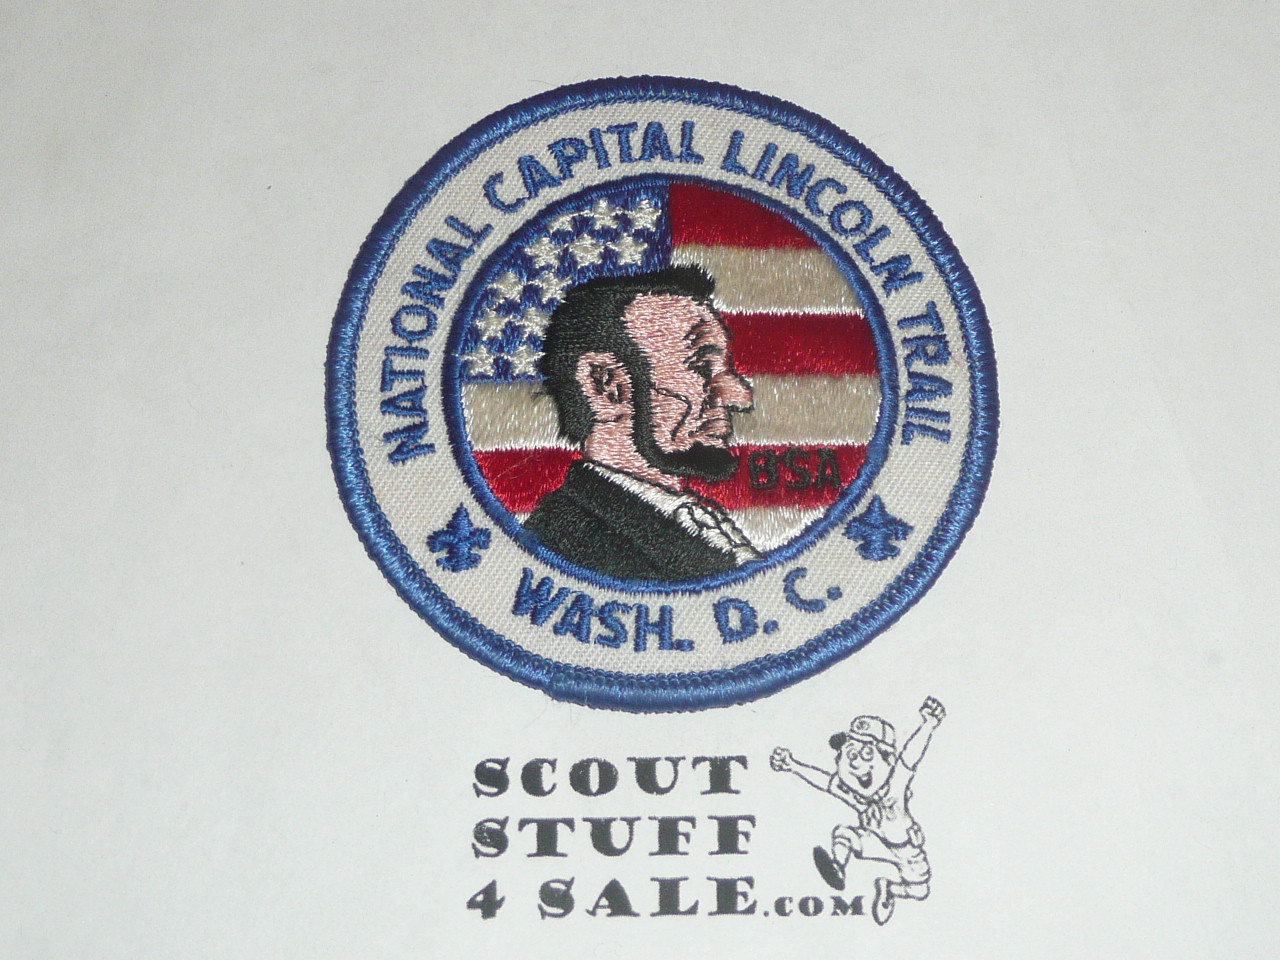 National Capital Lincoln Trail Patch